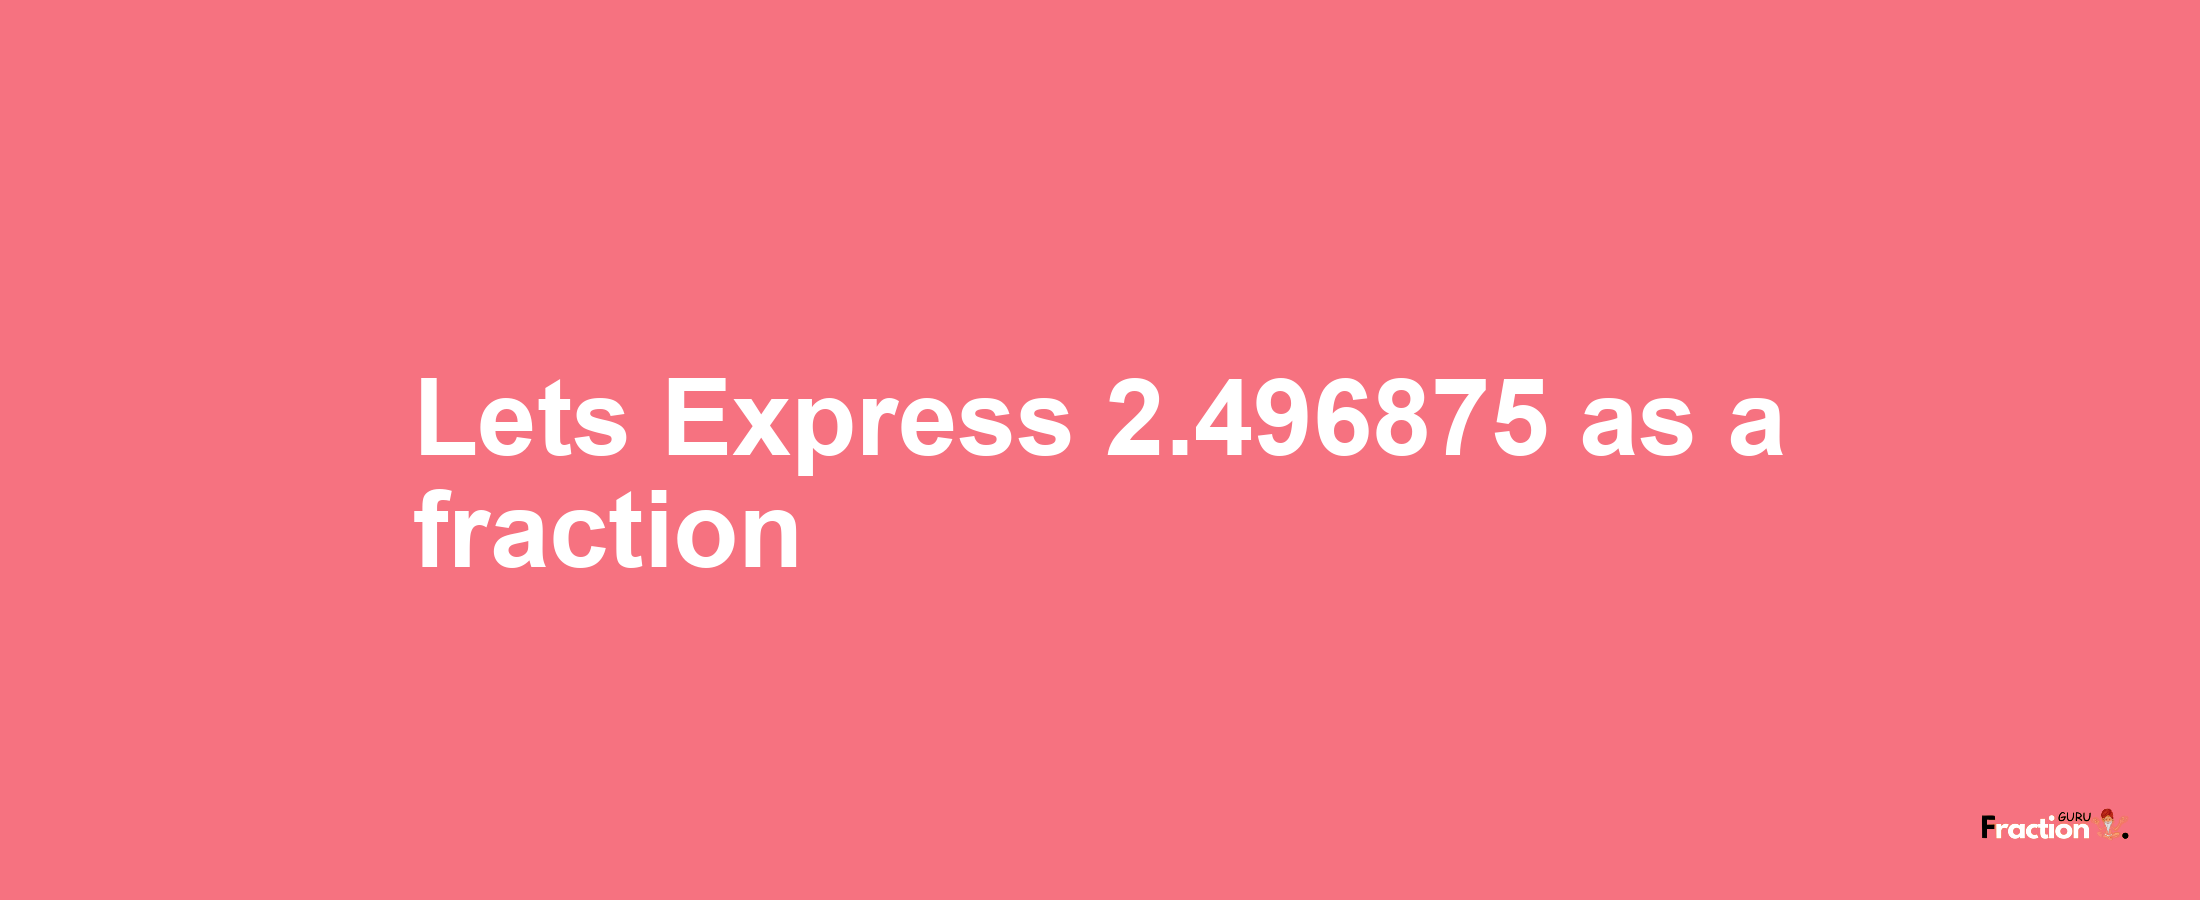 Lets Express 2.496875 as afraction